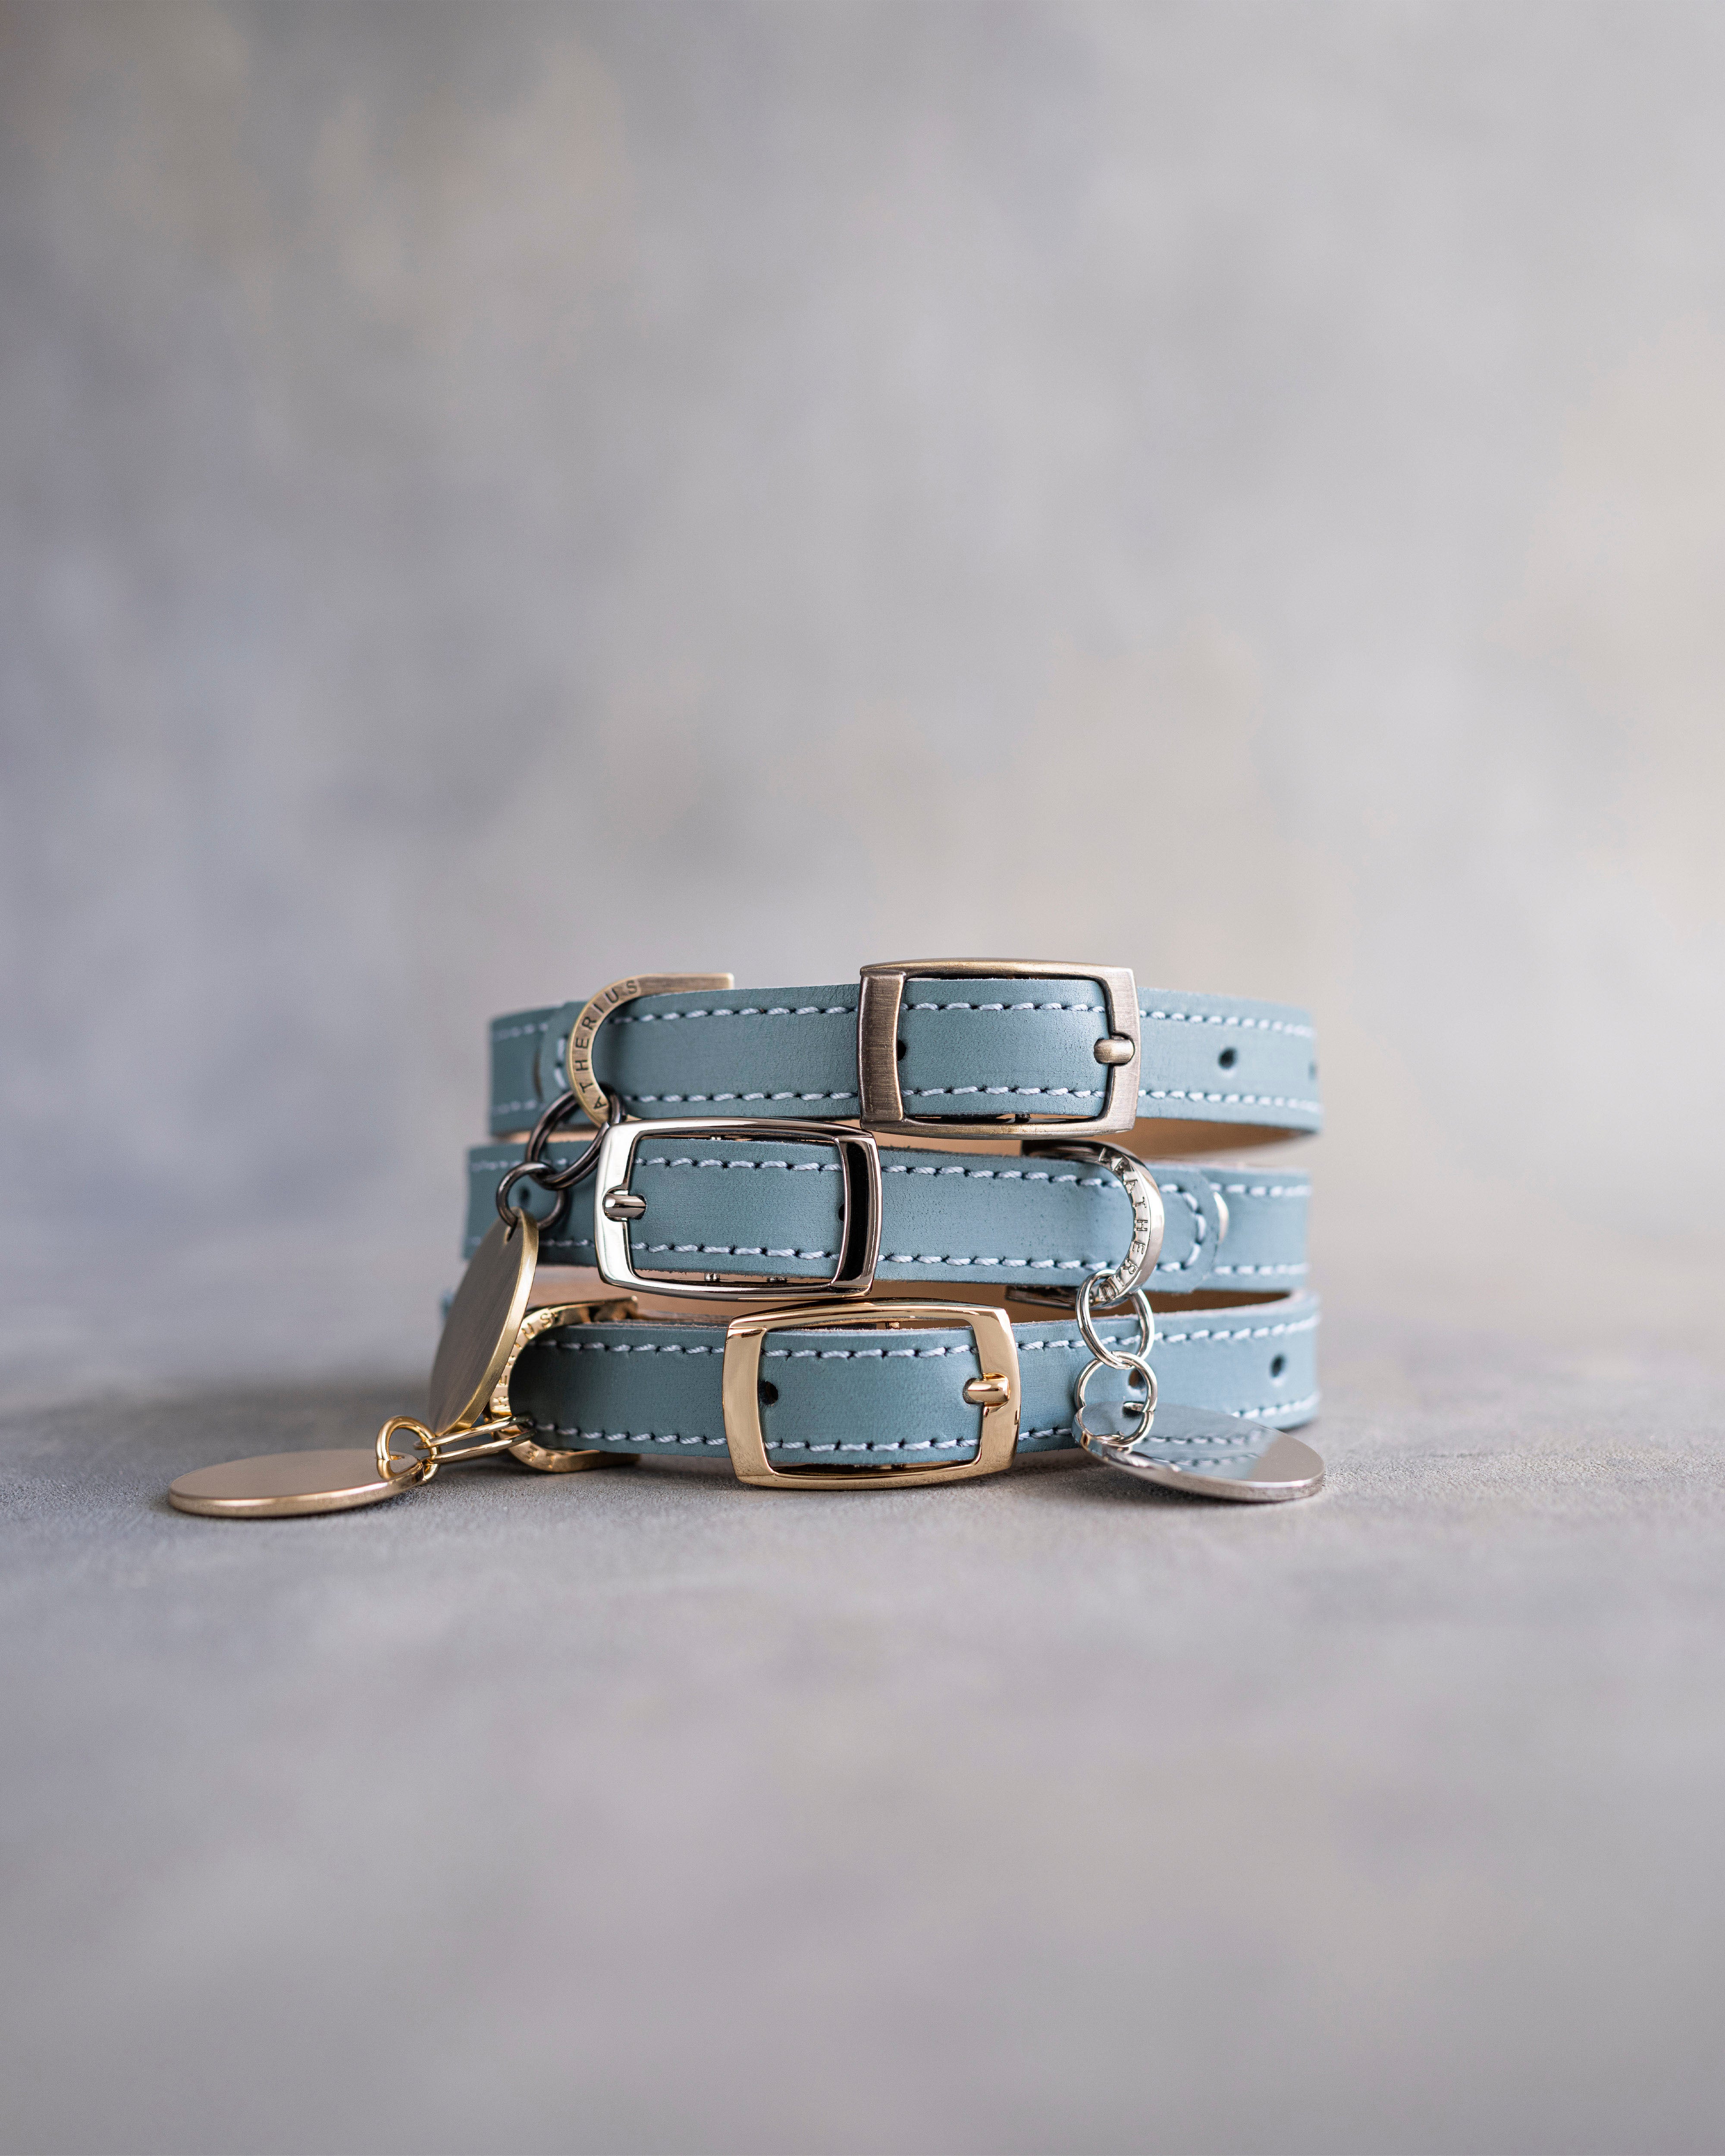 Dog Collar with classic belt buckle